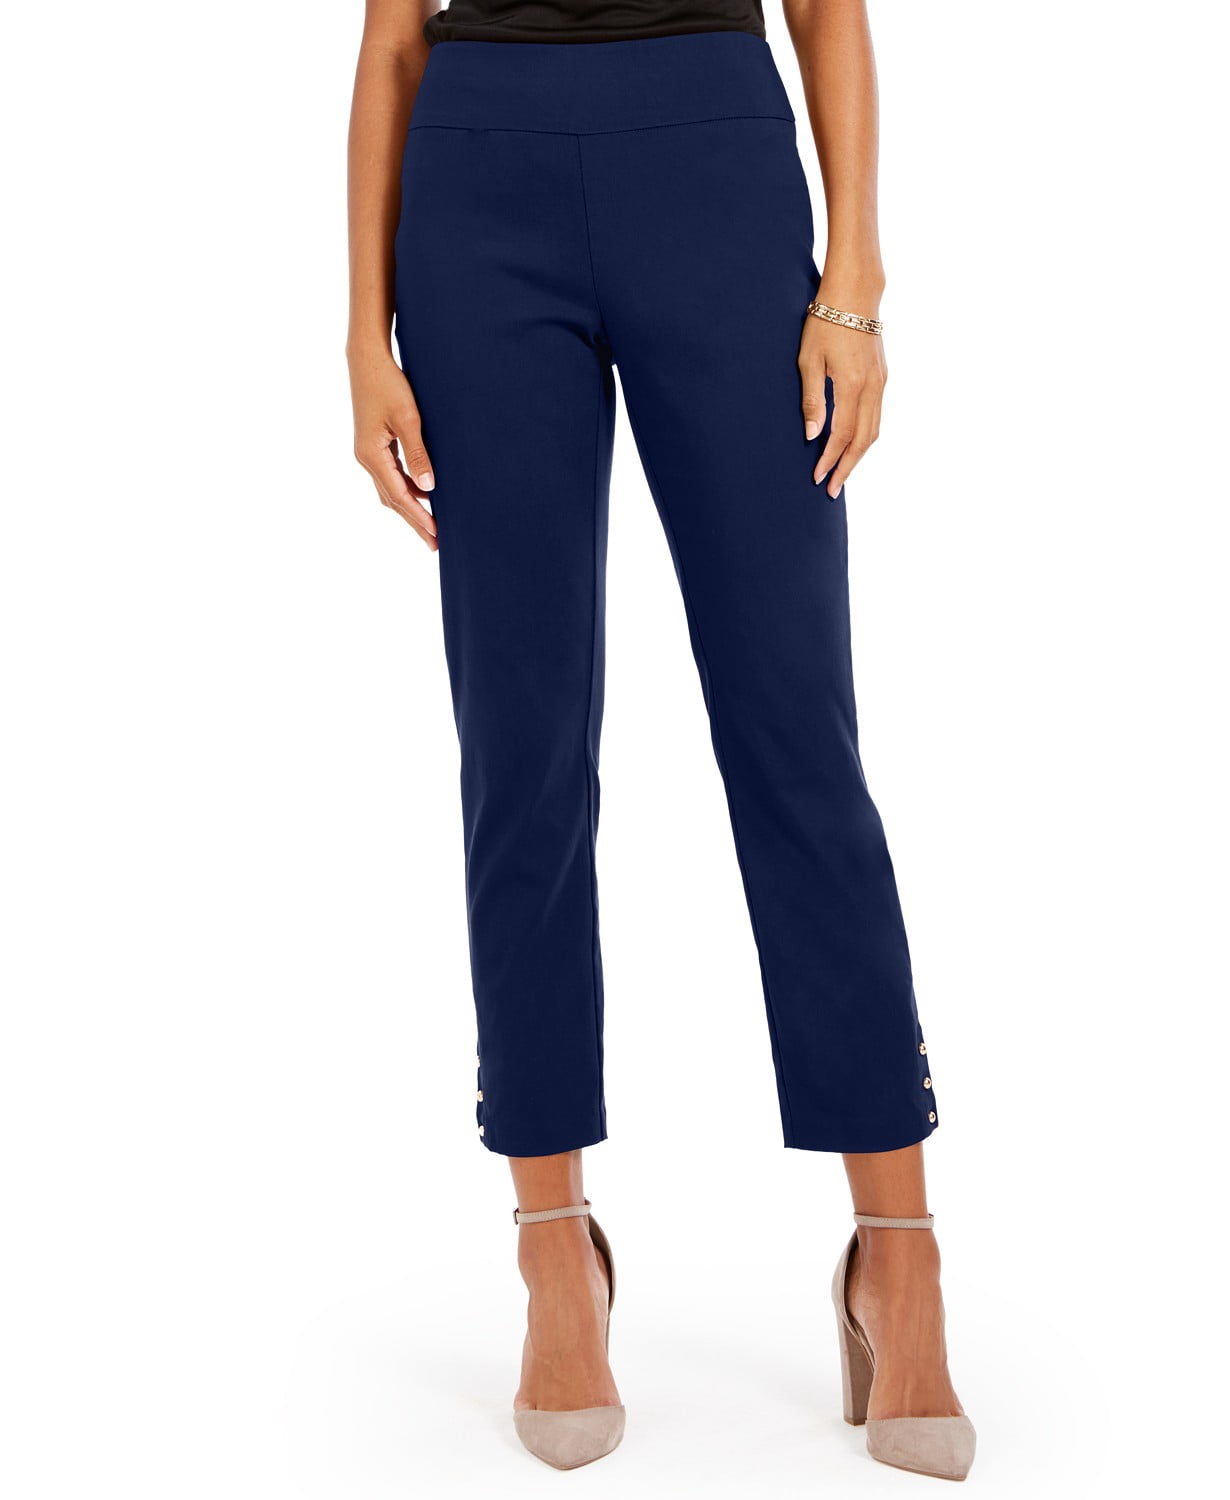 NY Collection Women's Petite Straight Leg Pull-On Pants Navy Size ...